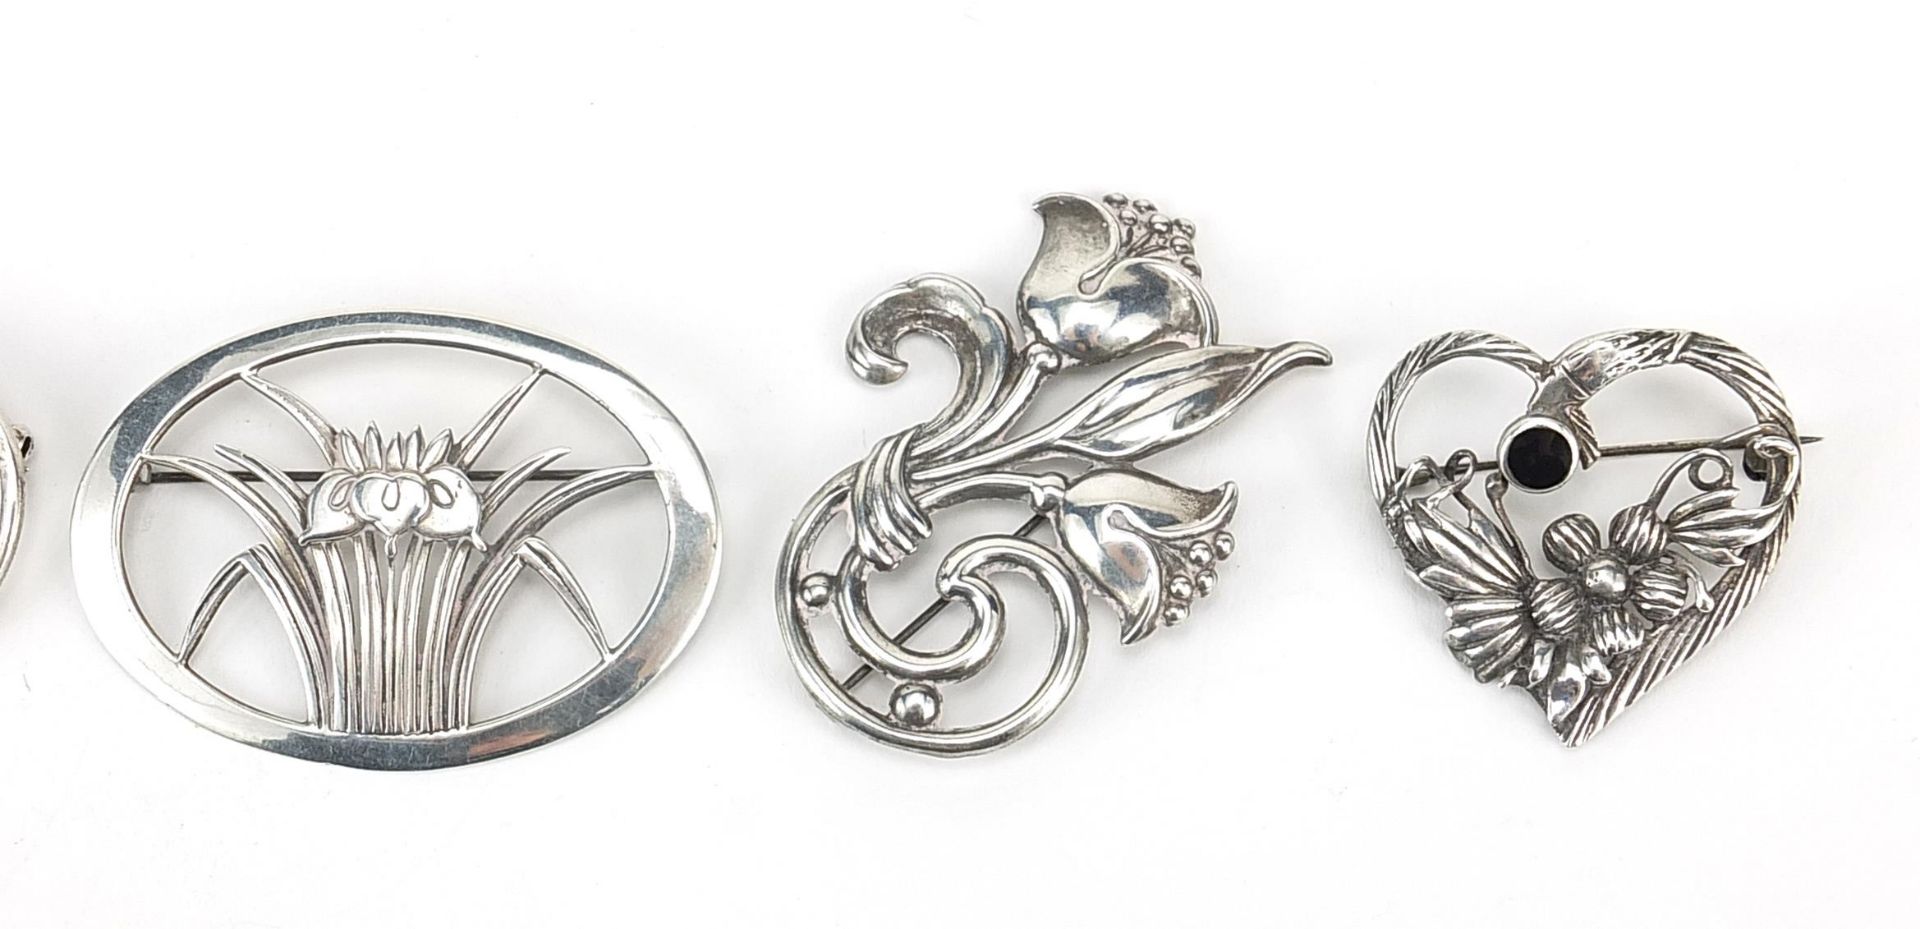 Six Art Nouveau design silver brooches, the largest 5.8cm wide, total 49.8g - Image 3 of 5